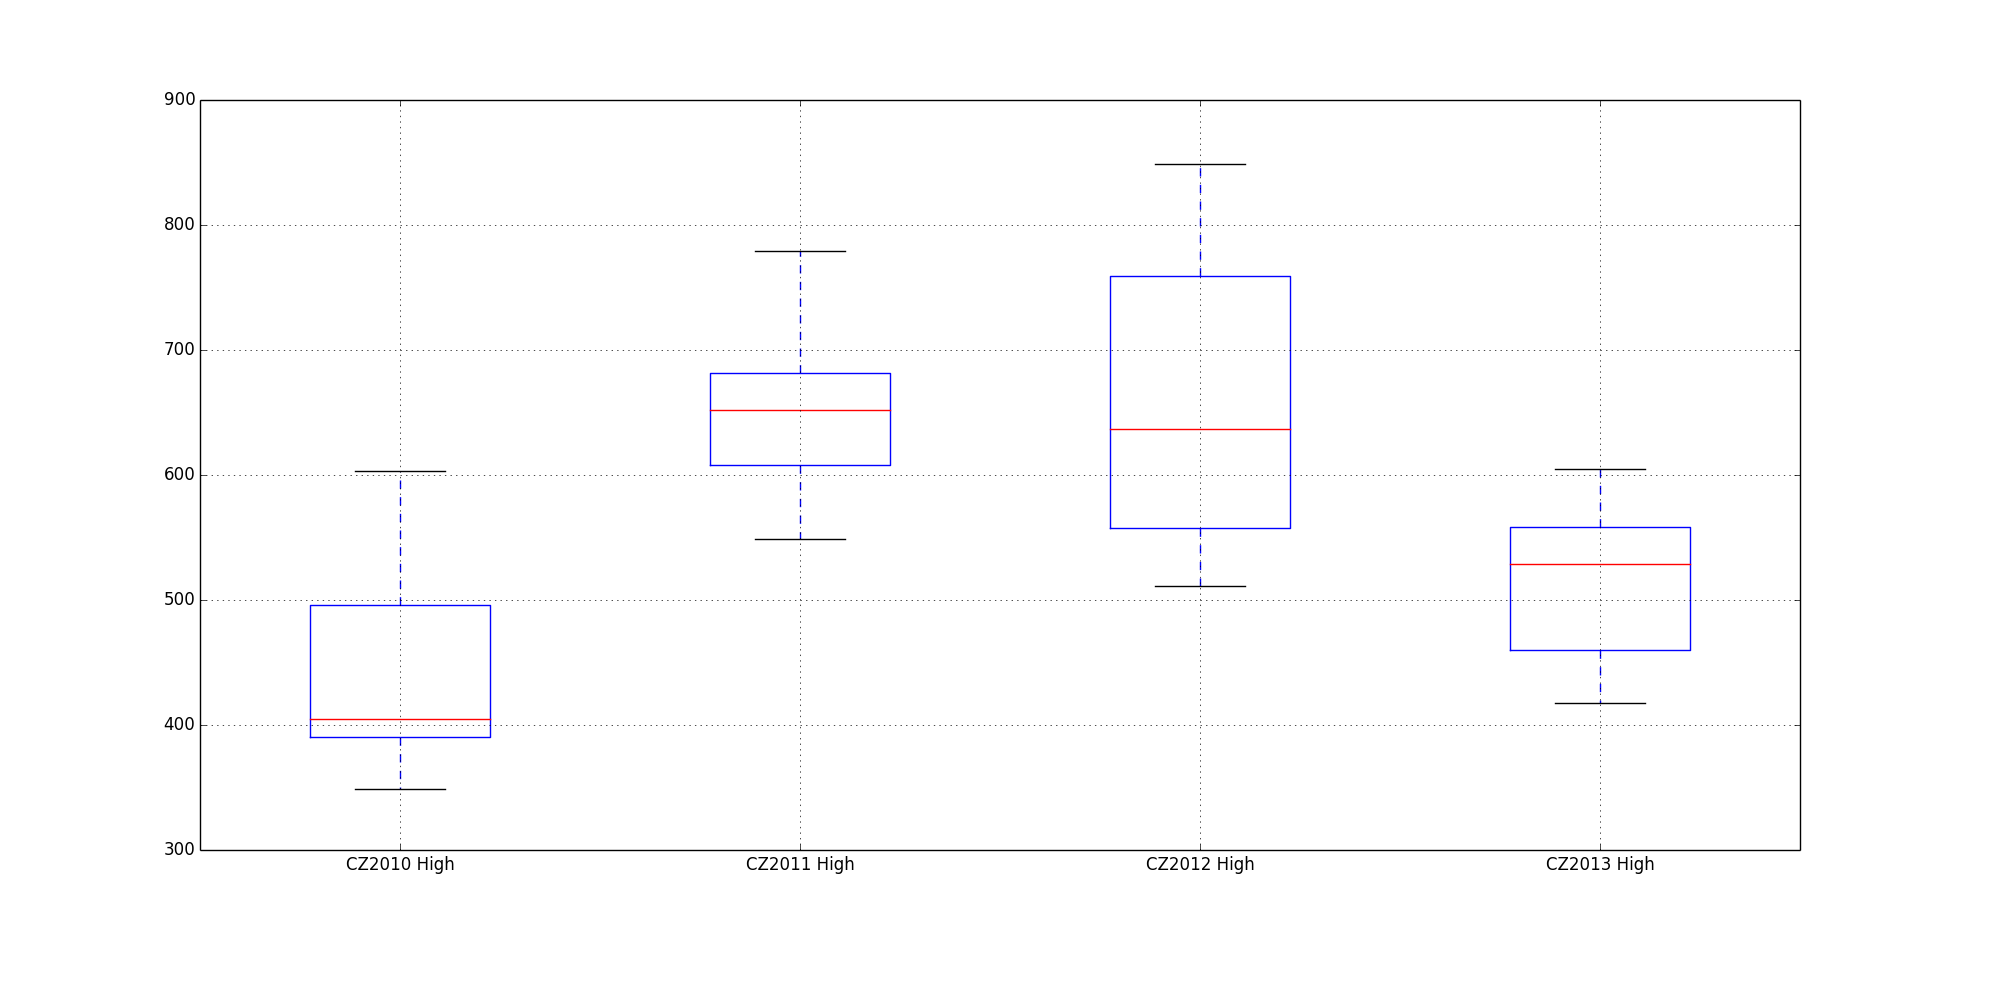 CZ2010 to CZ2013 Box Plot with All Data Points